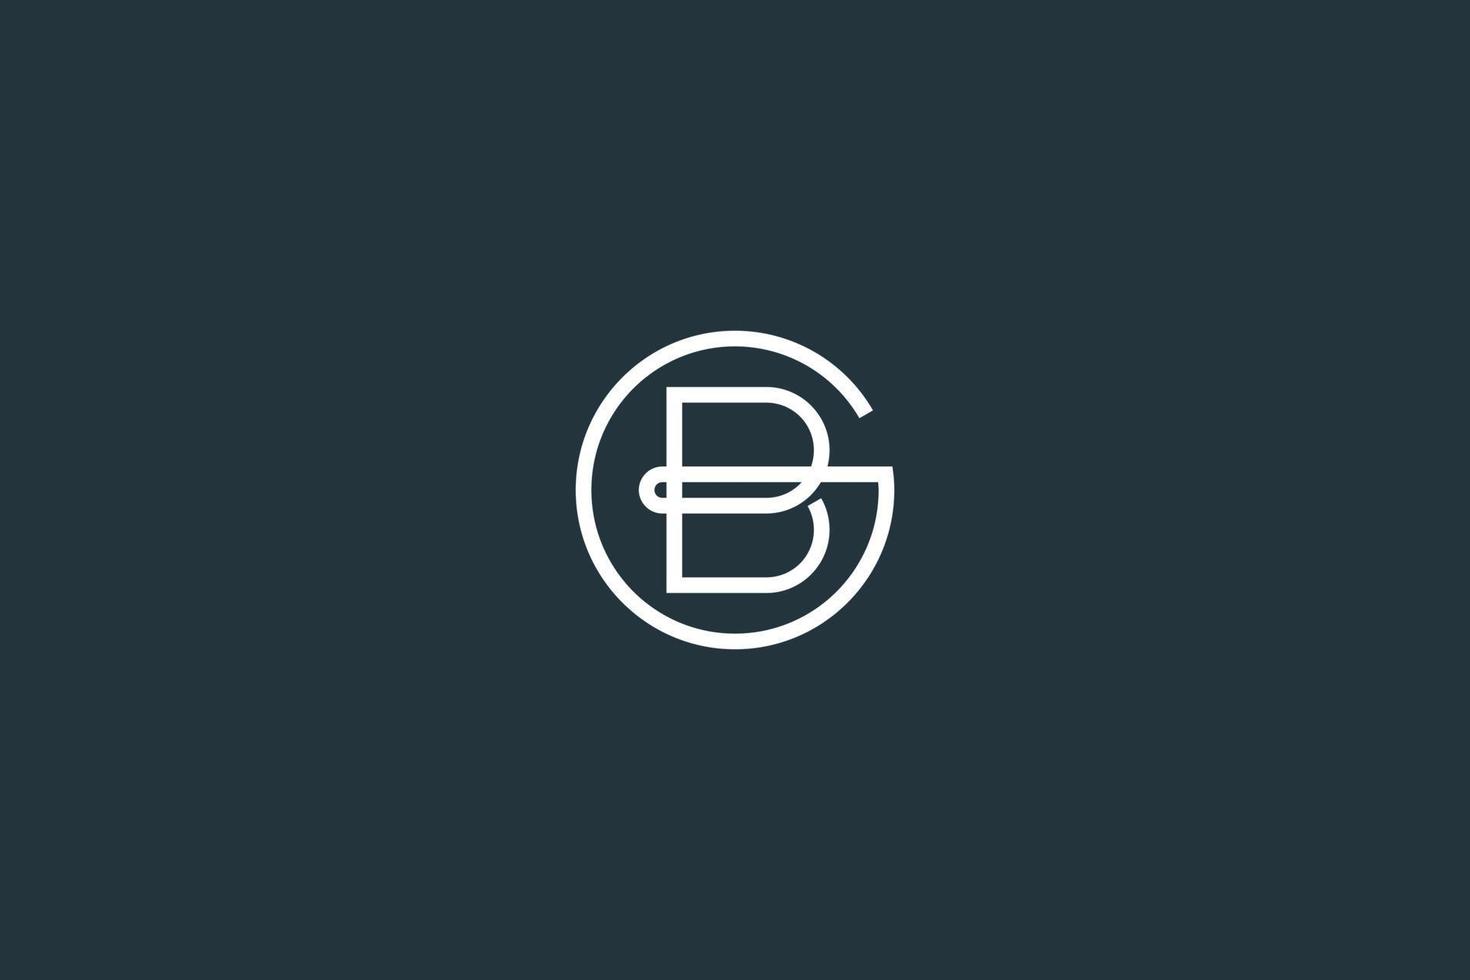 Minimal and Simple Letter GB or BG Logo Design Vector Template